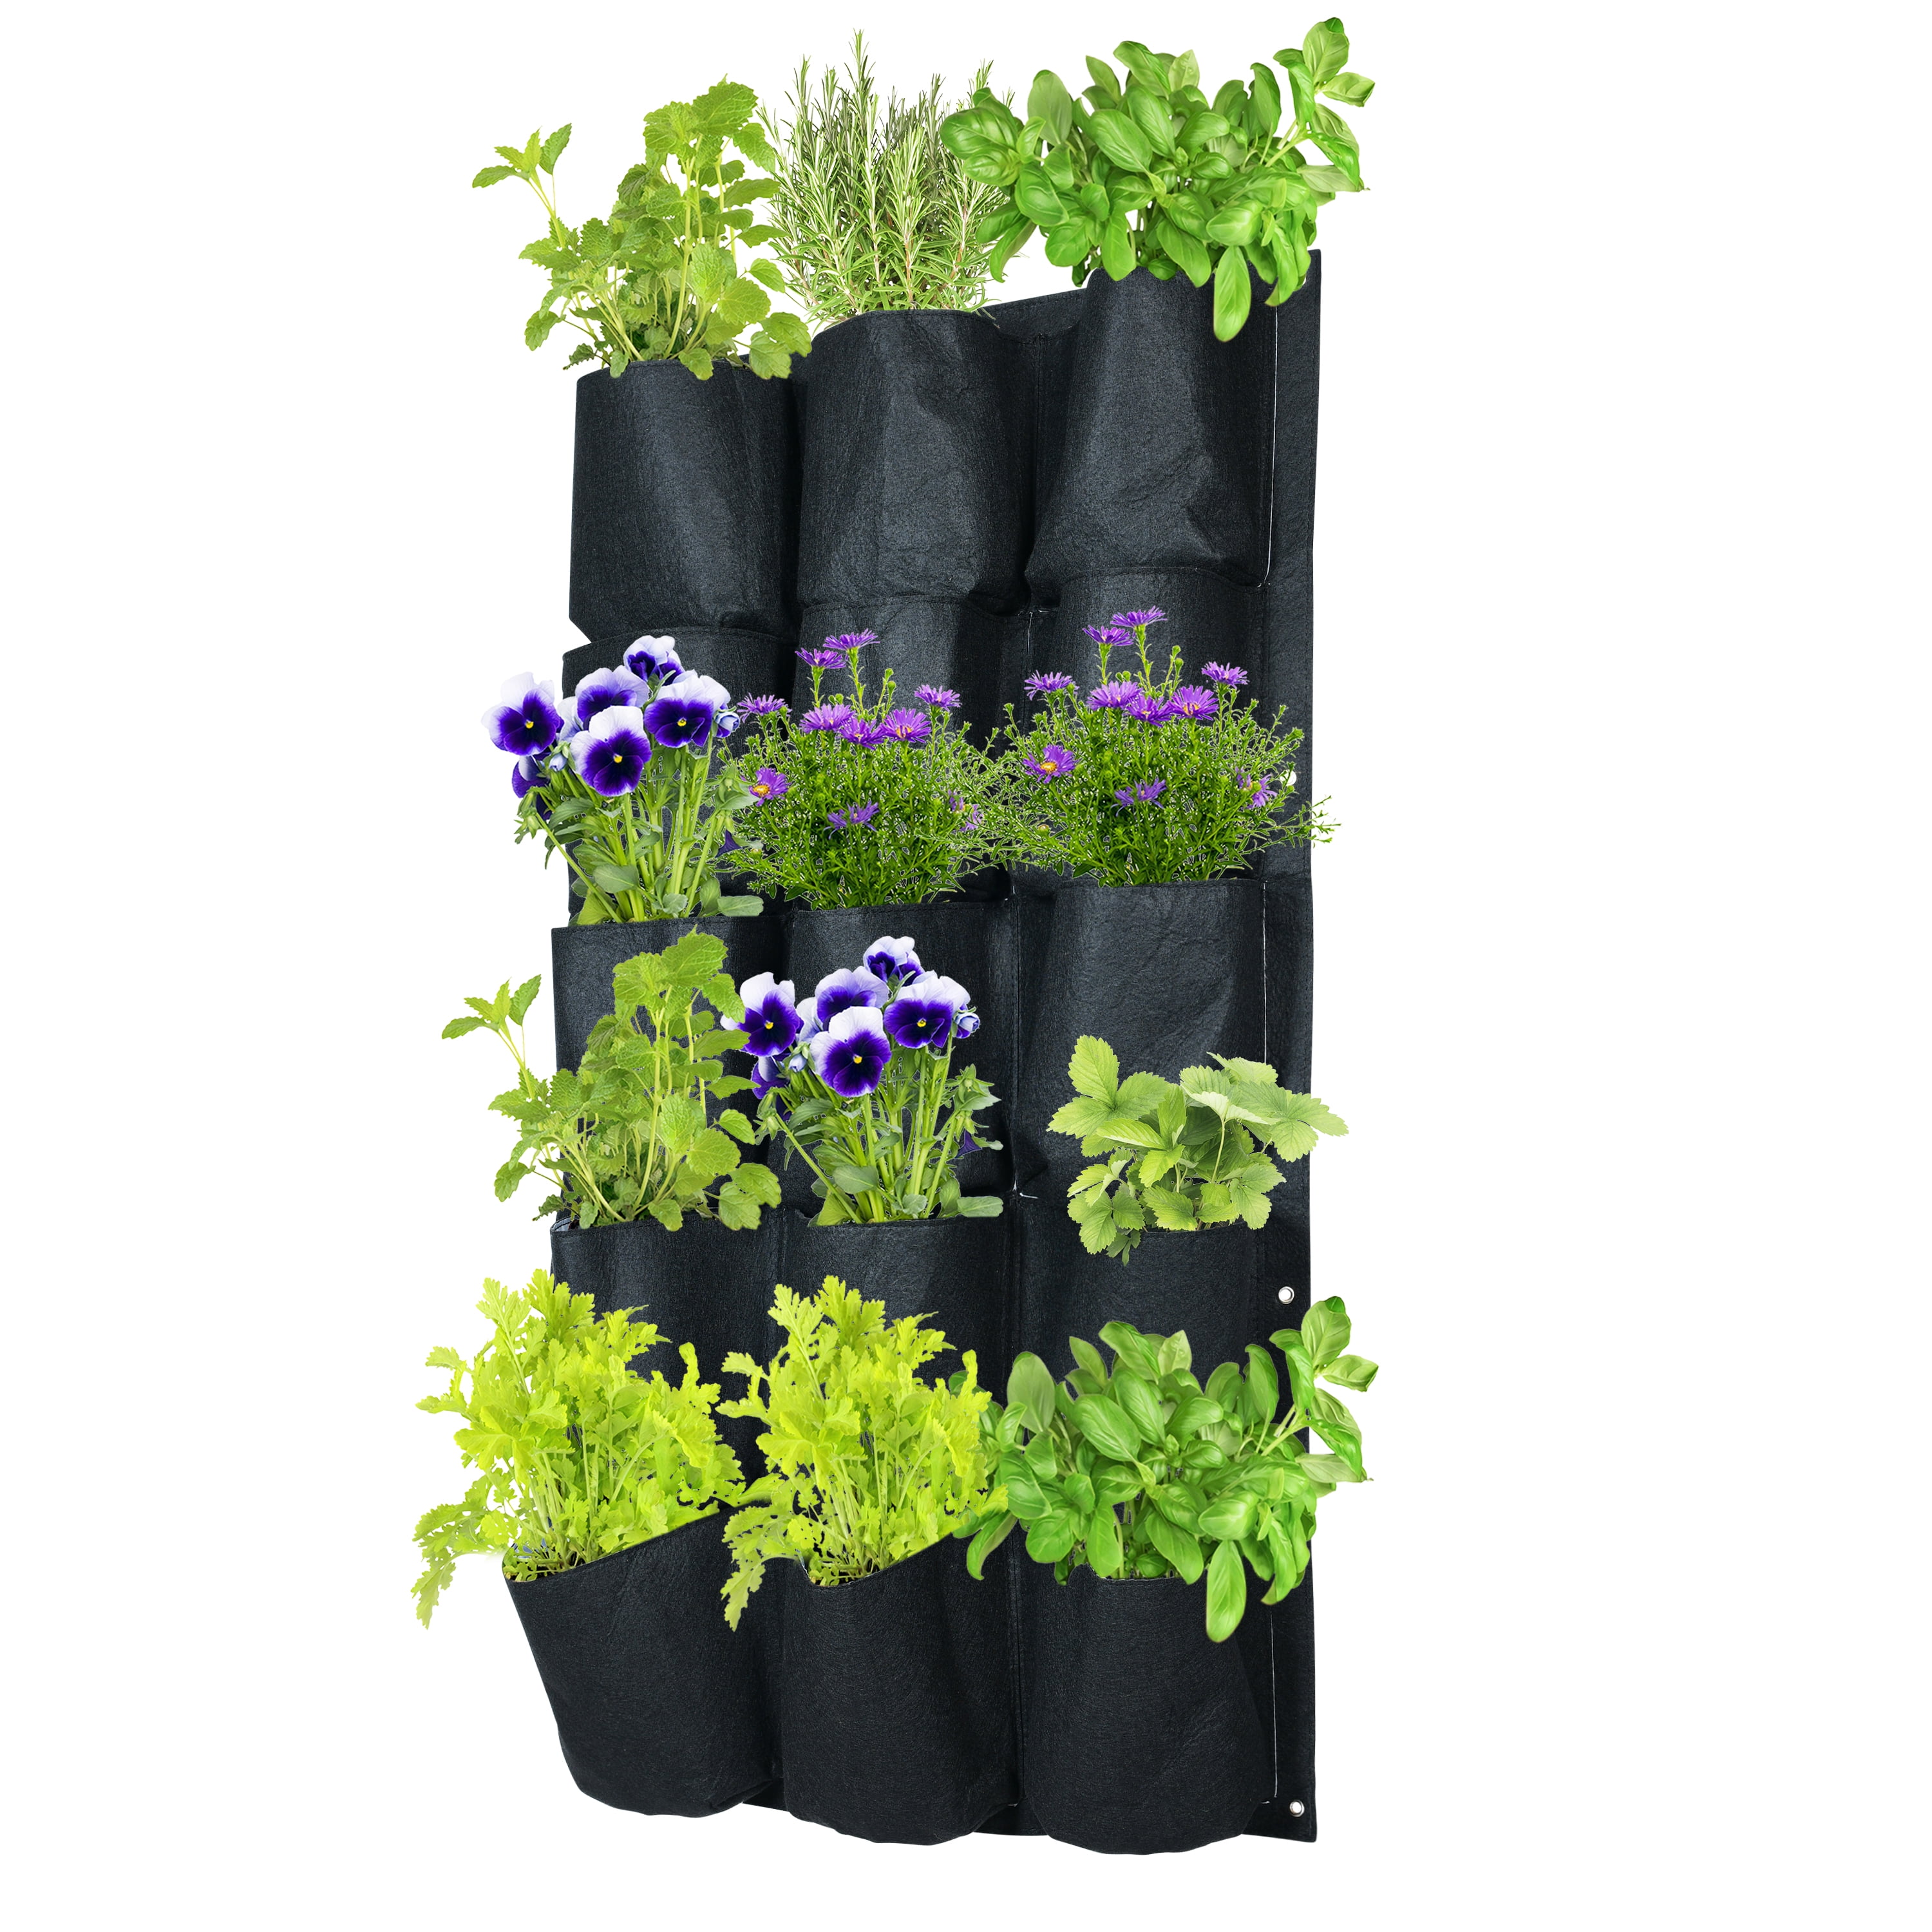 Pri Gardens Hanging Vertical Wall Planter for Herbs & Plants, W 20" x H